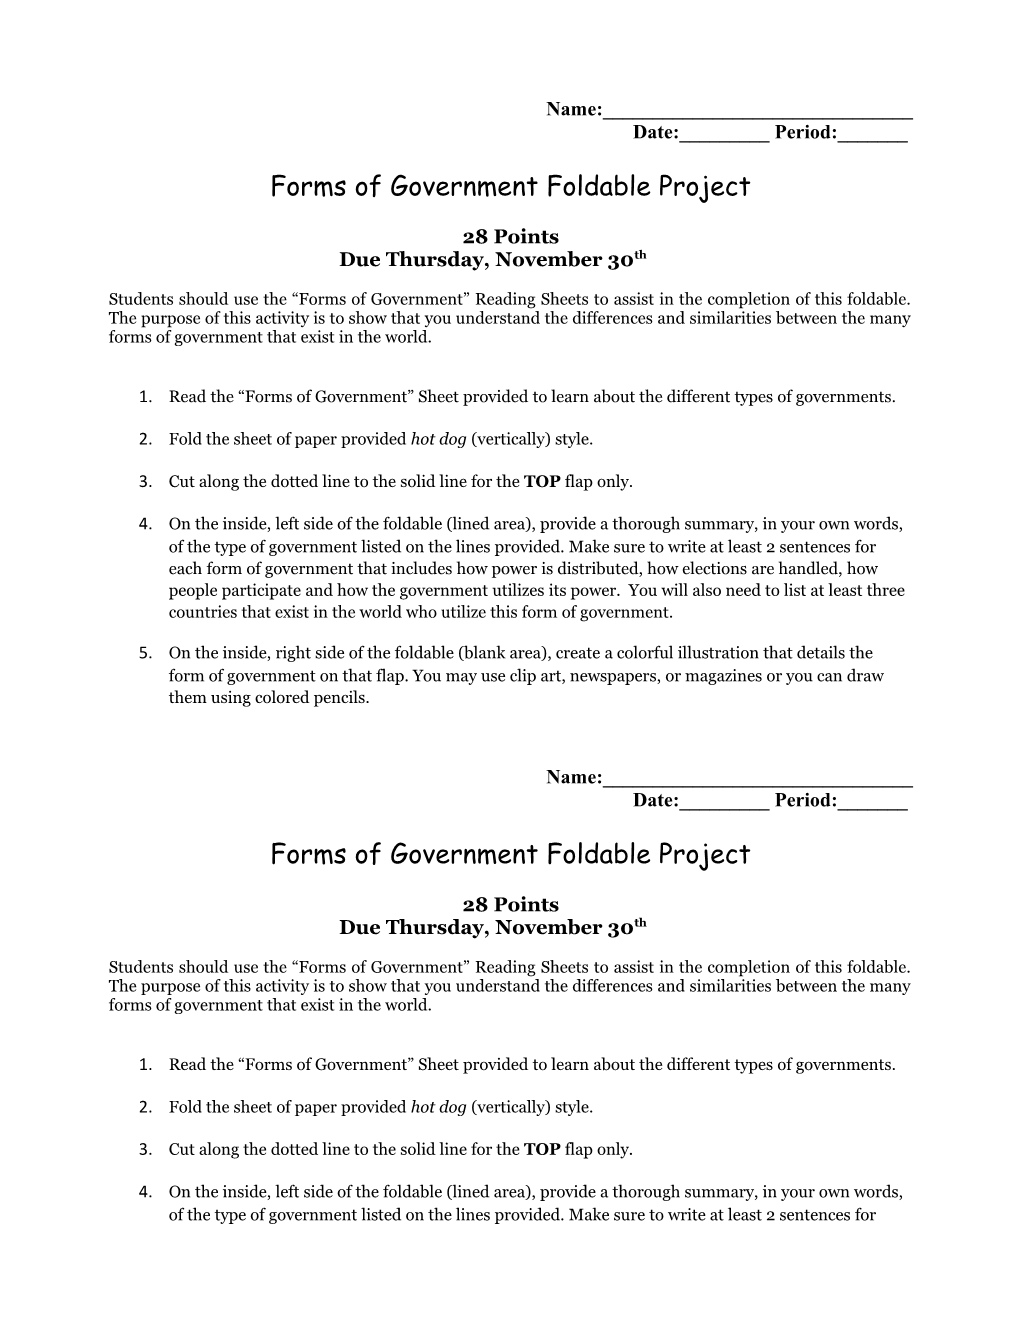 Forms of Government Foldable Project